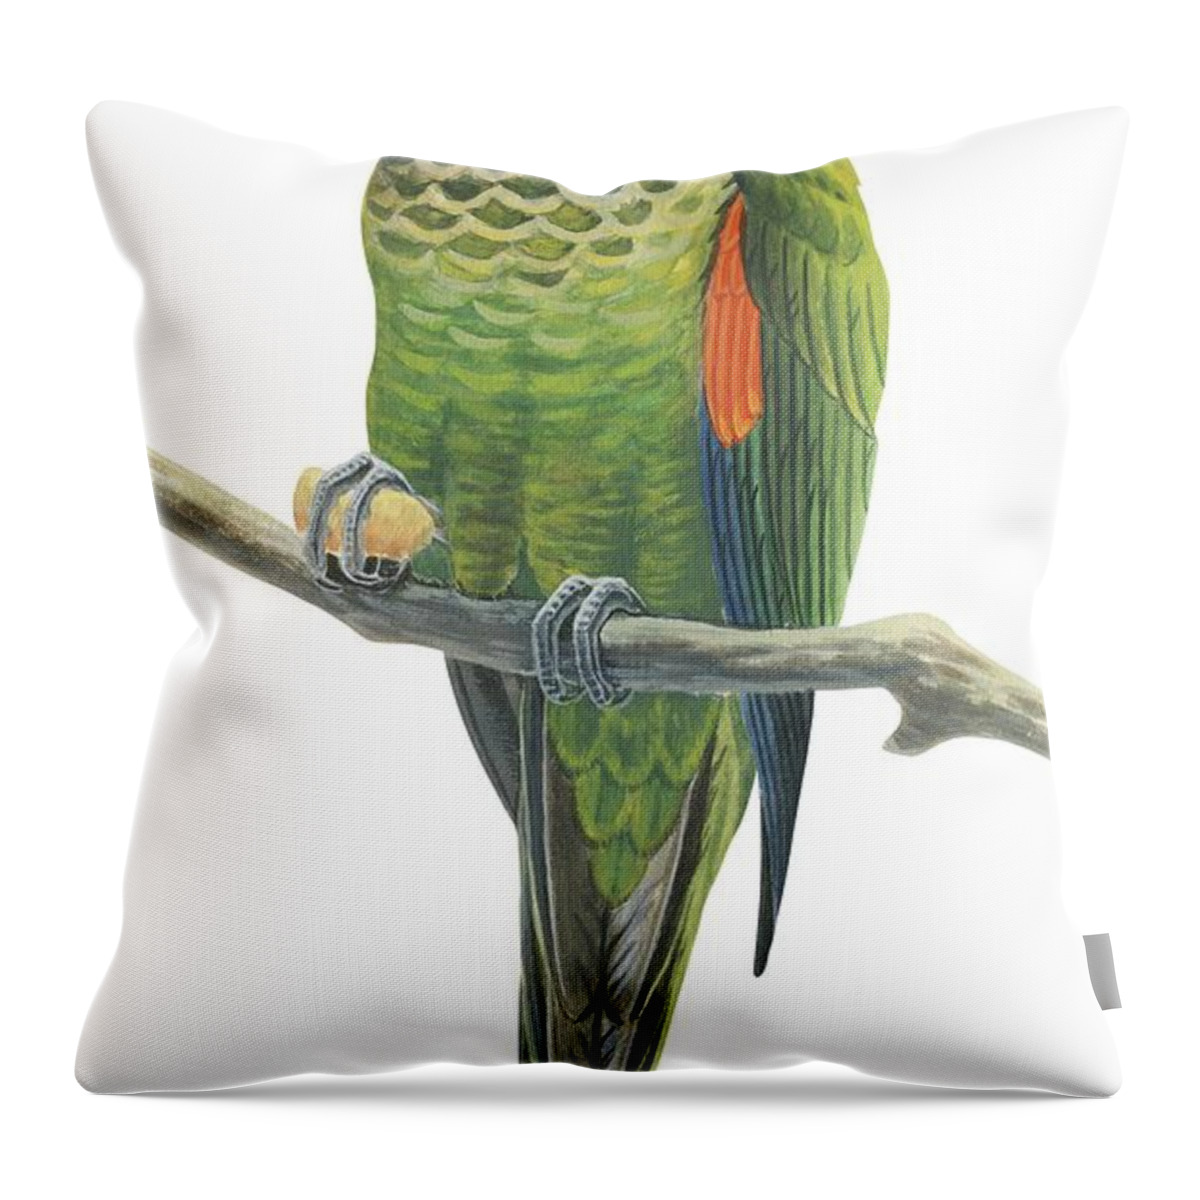 No People; Vertical; White Background; One Animal; Nature; Wildlife; Illustration And Painting; Rock Parakeet; Pyrrhura Rupicola; Zoology; Green; Perching; Branch Throw Pillow featuring the drawing Rock parakeet by Anonymous